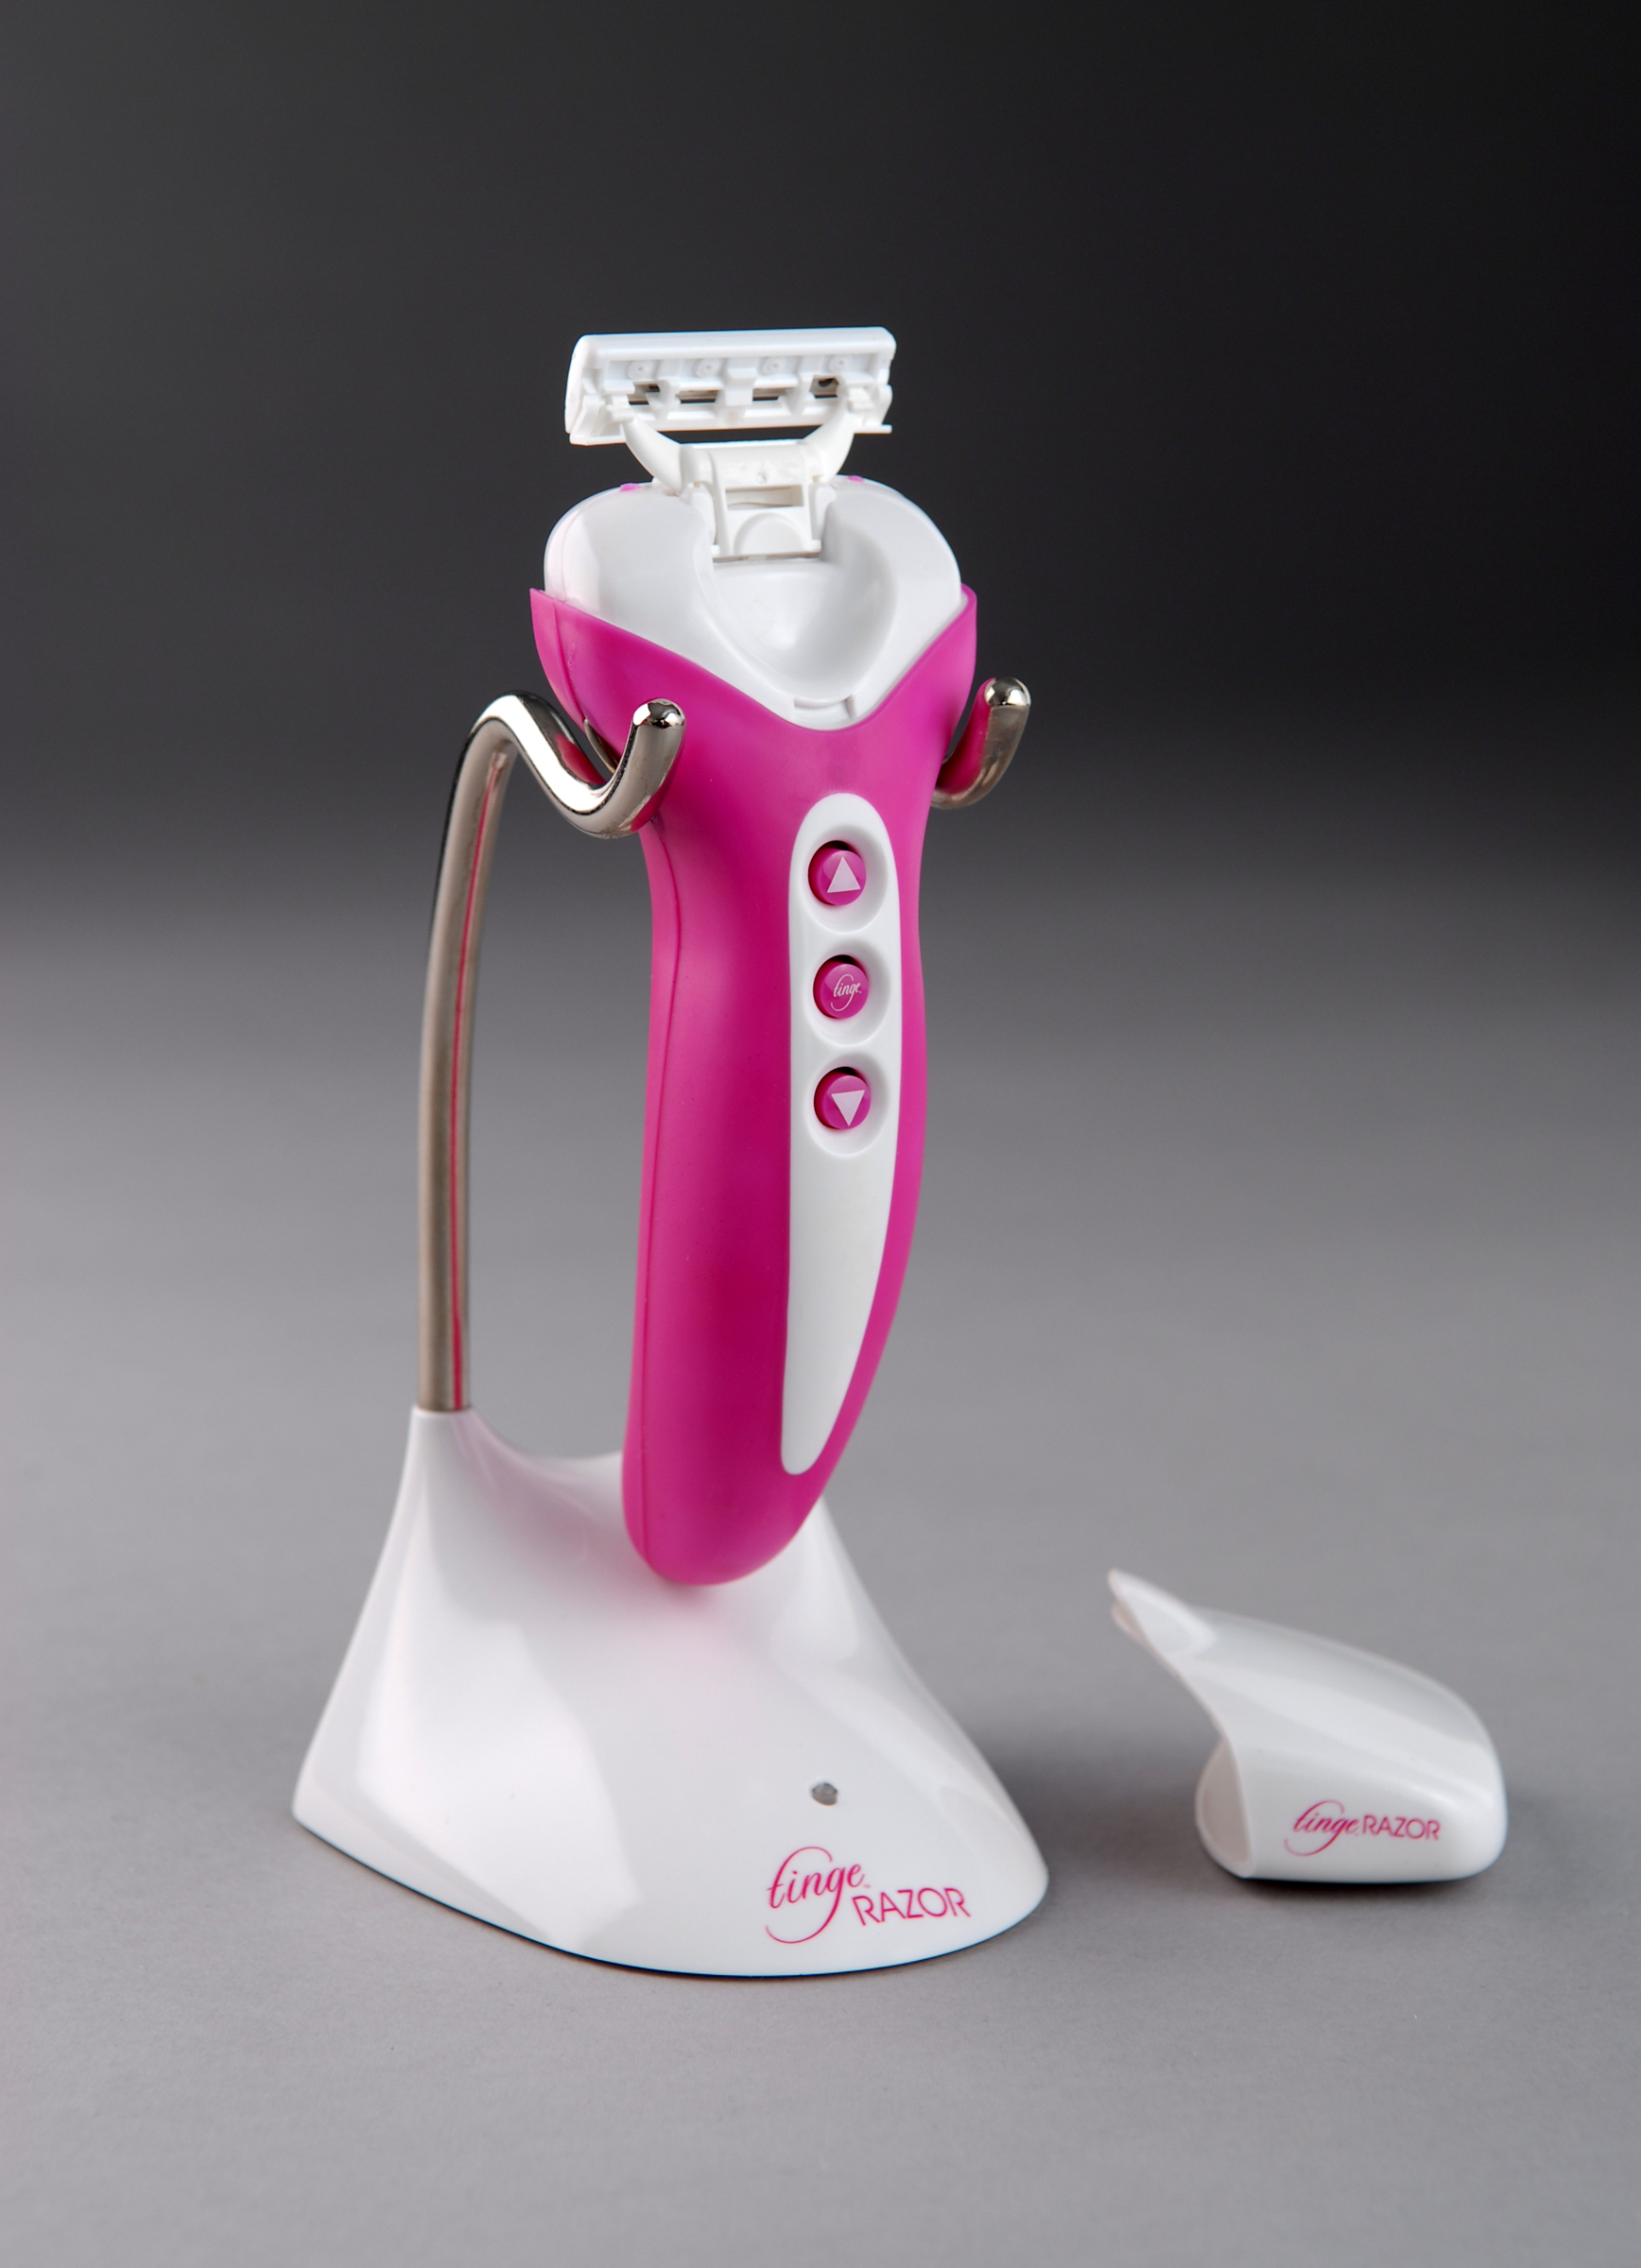 Tinge® Offers Discreet Luxury Vibrator Disguised As A Razor Woman 2321